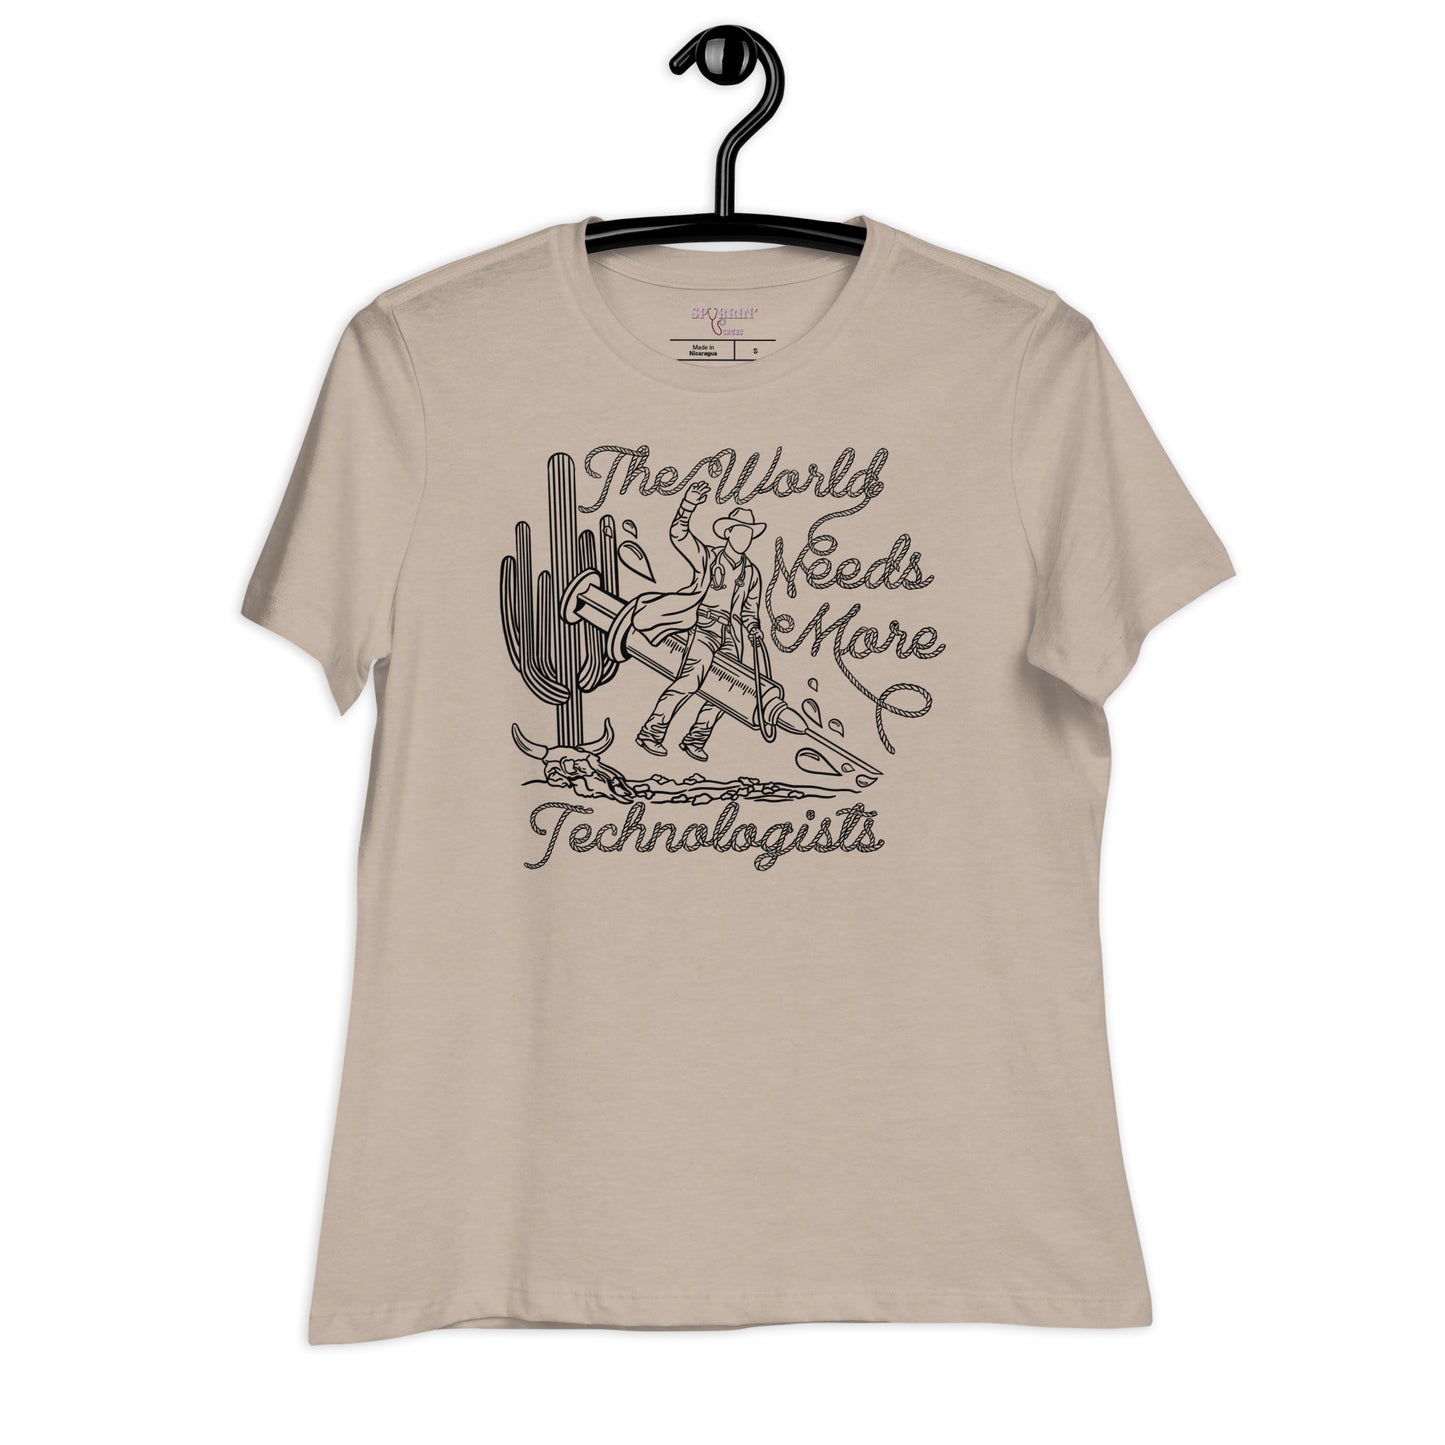 TWNM- Technologists Relaxed T- Shirt Light Colors